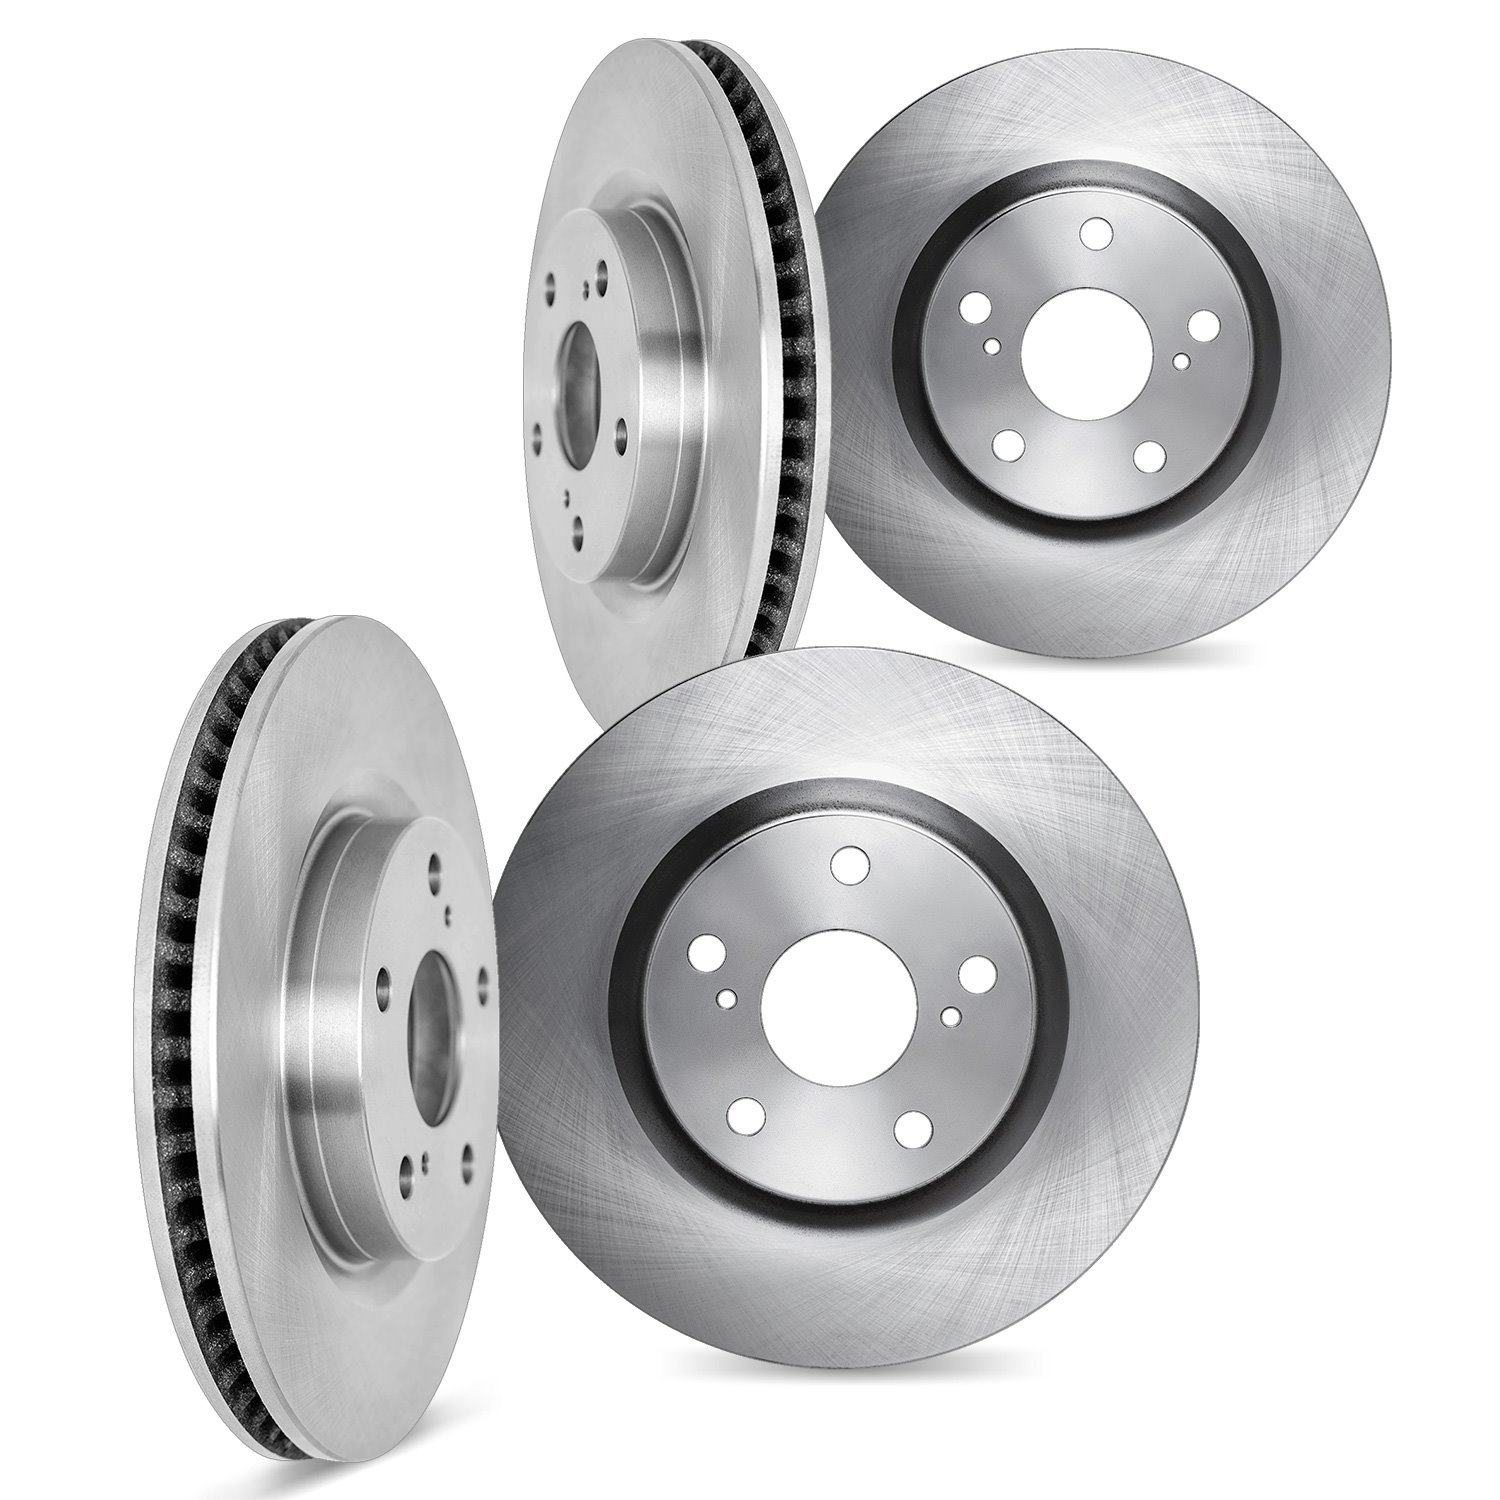 6004-42003 Brake Rotors, Fits Select Mopar, Position: Front and Rear